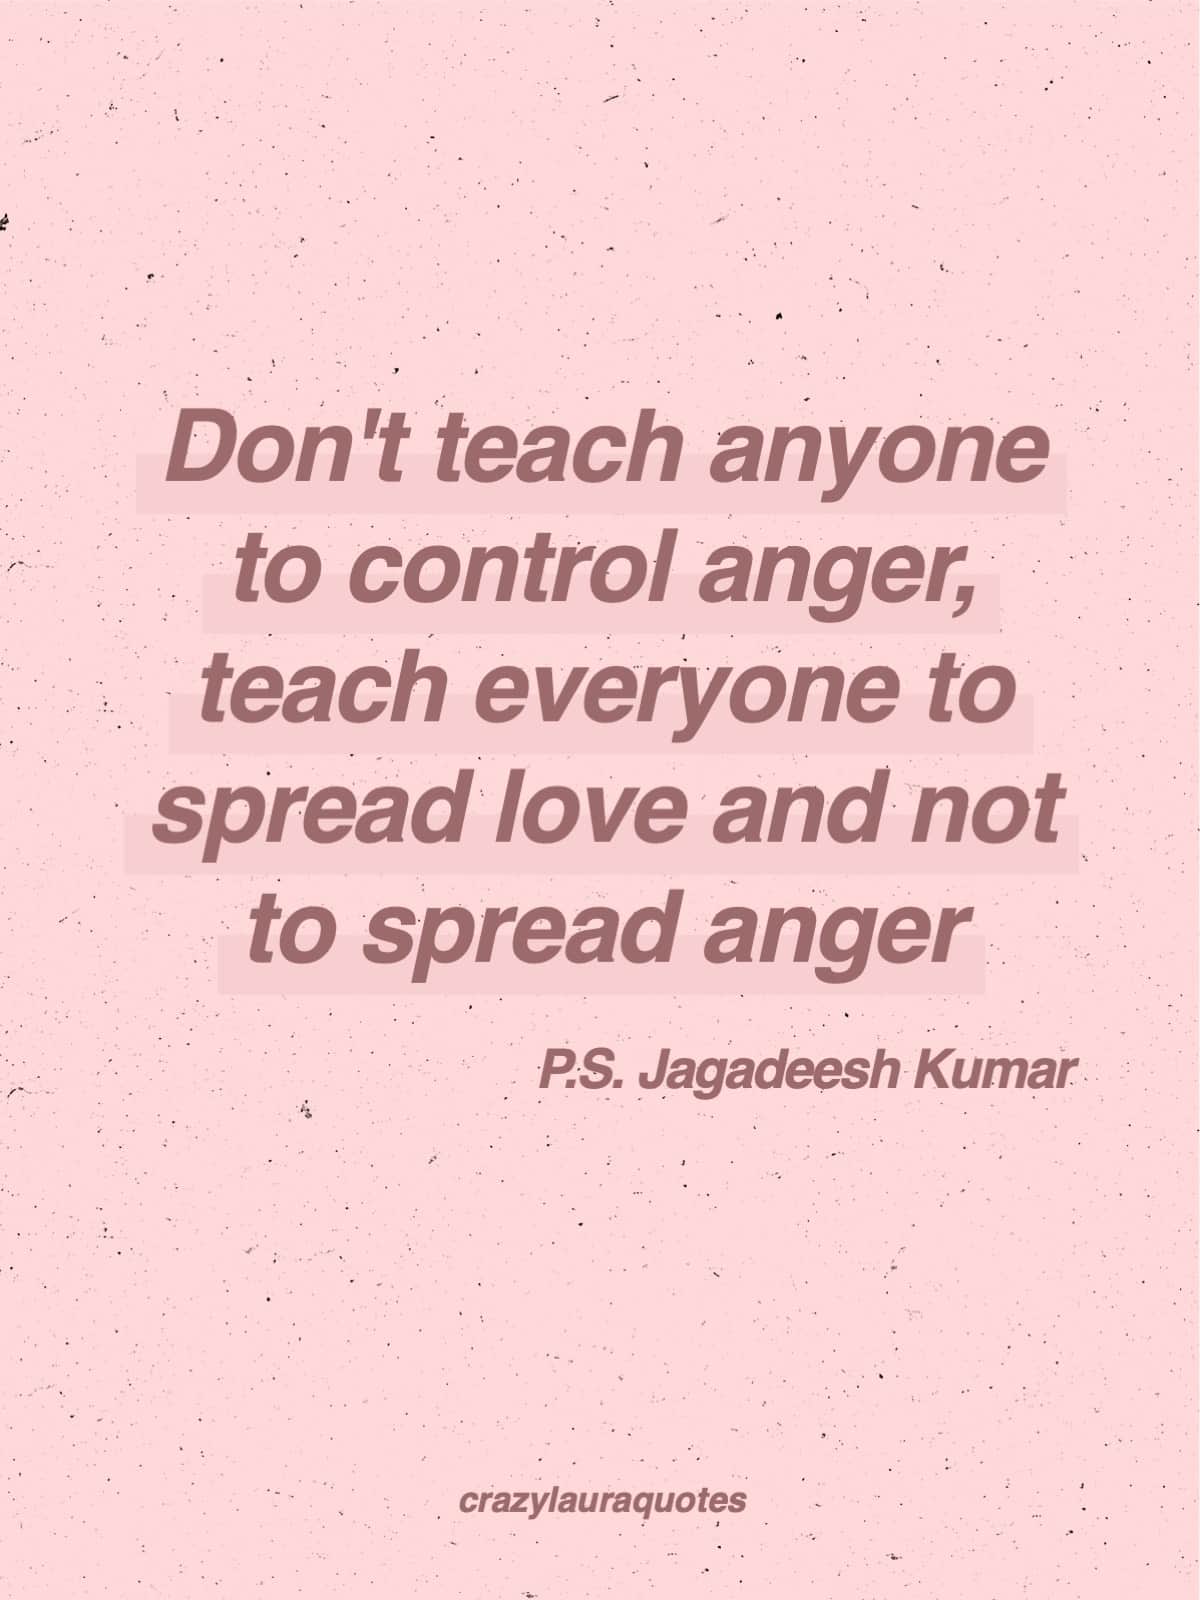 never spread anger just spread love quote